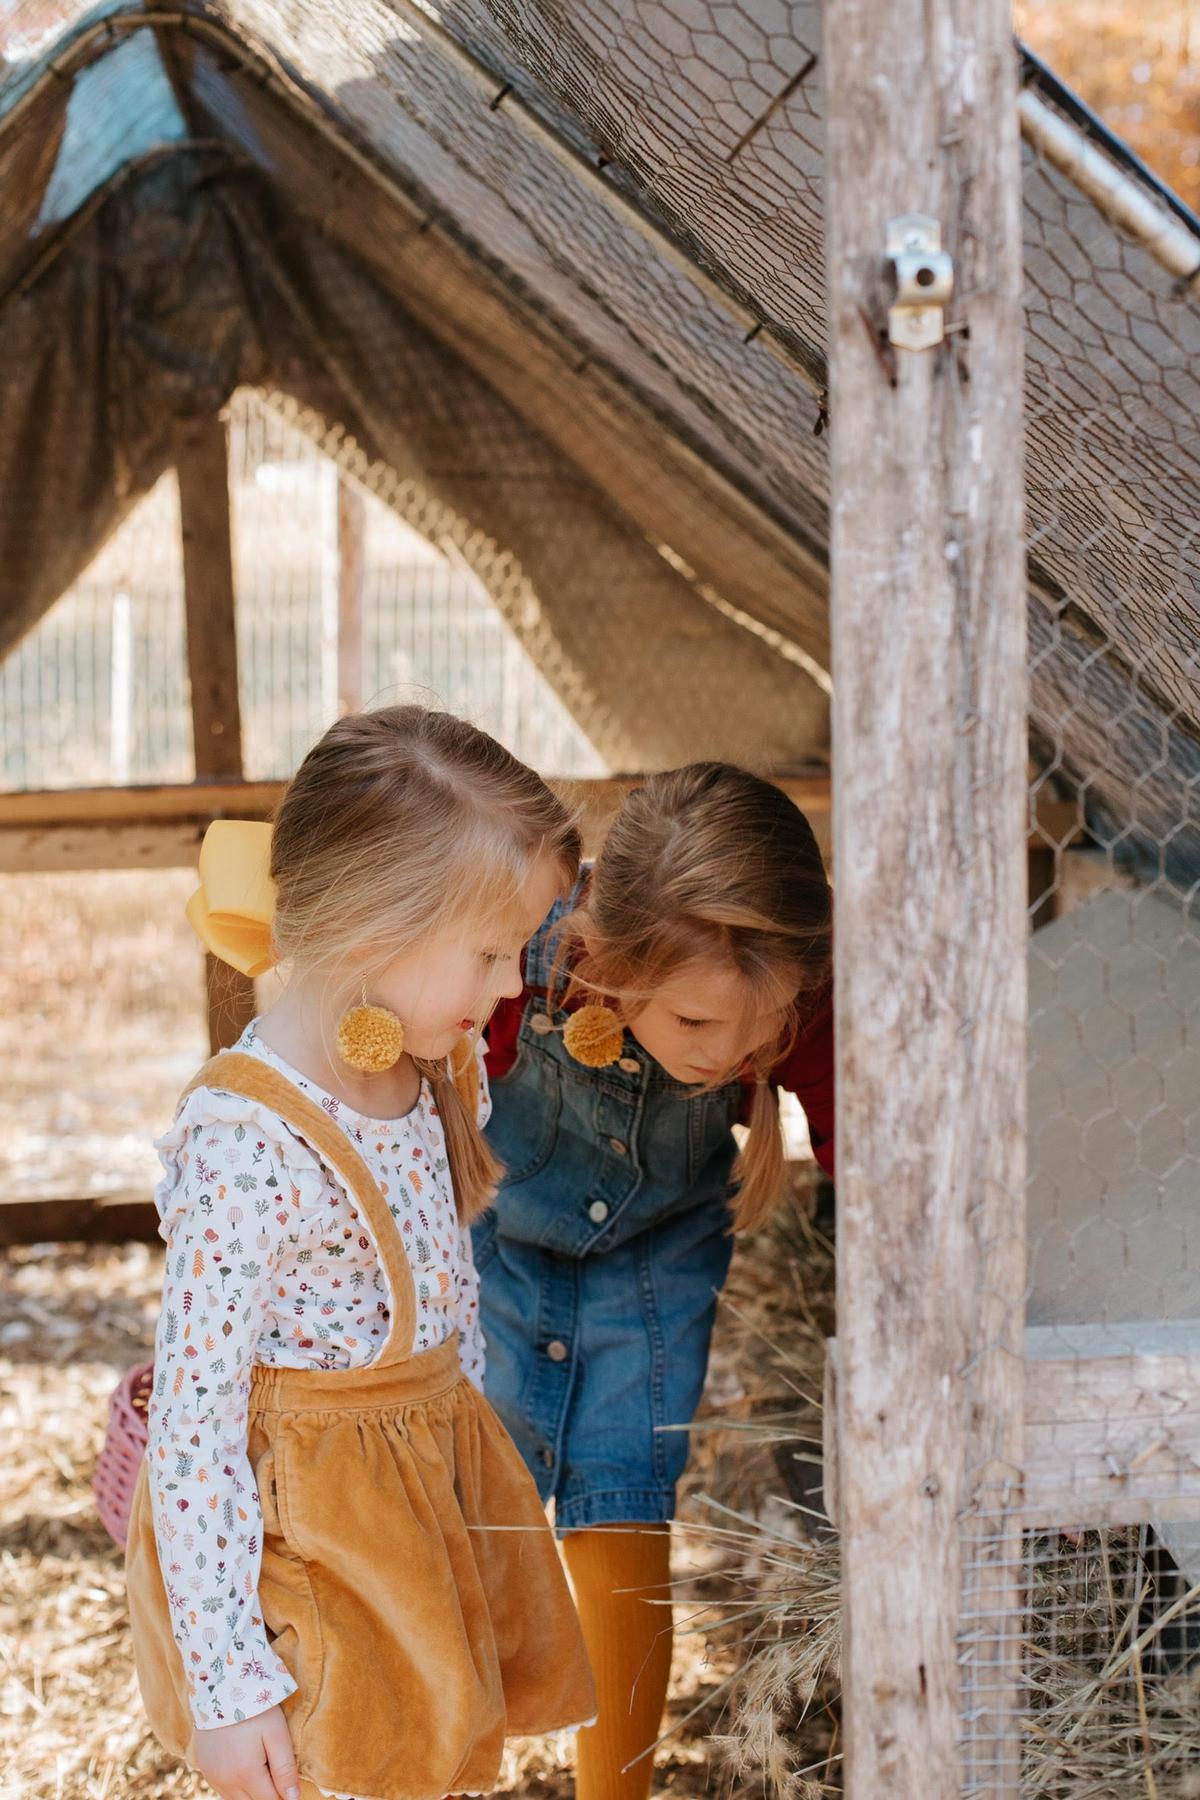 Cortney and Samuel's daughters helping out on the farm. (Courtesy of The Tiffaney Lawson Company)